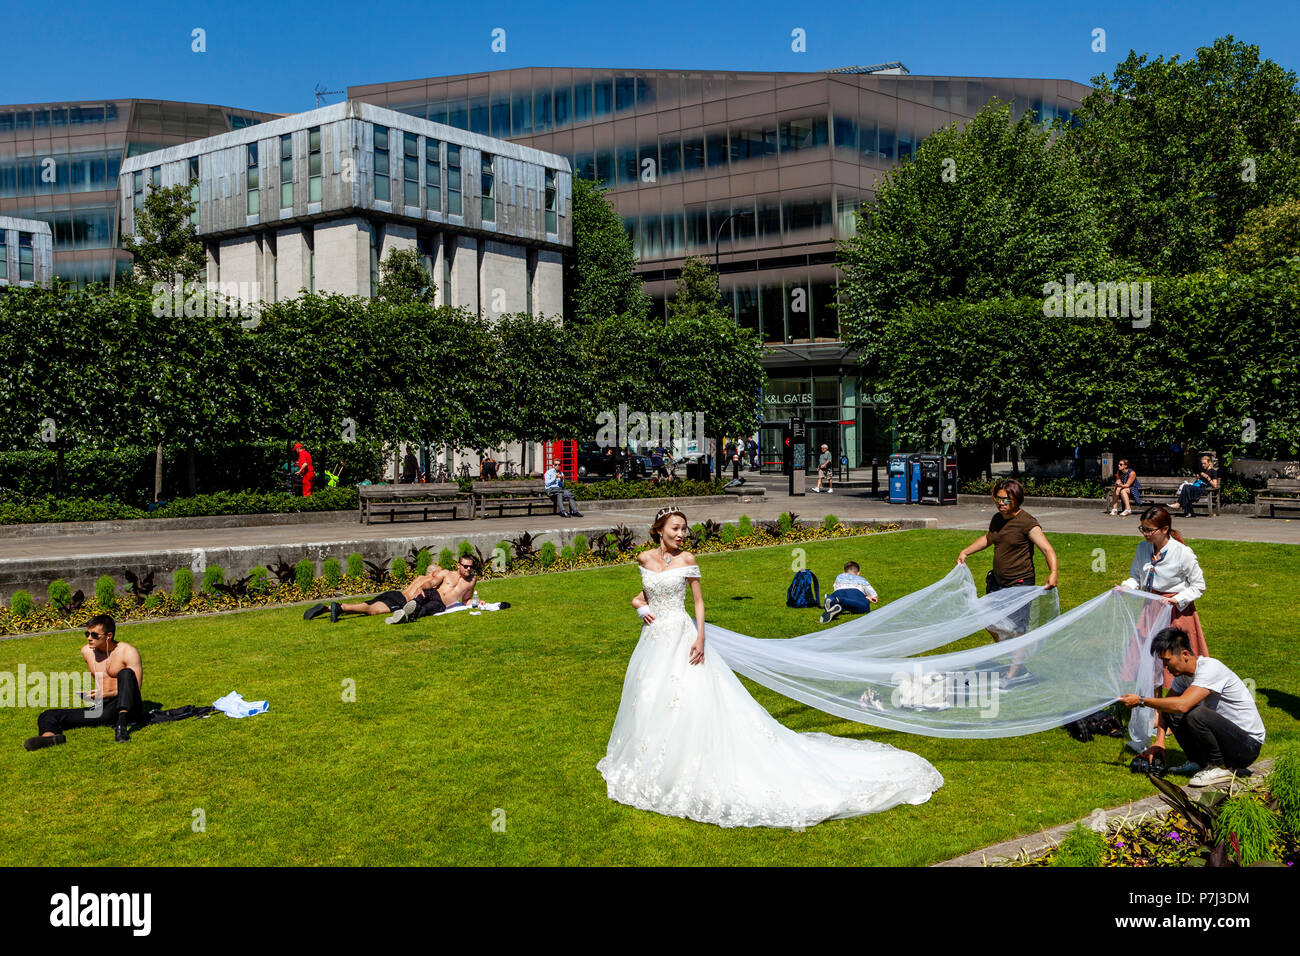 A Visiting Bride From Hong Kong Poses For Wedding Photography On The Lawns Outside St Paul’s Cathedral, London, England Stock Photo